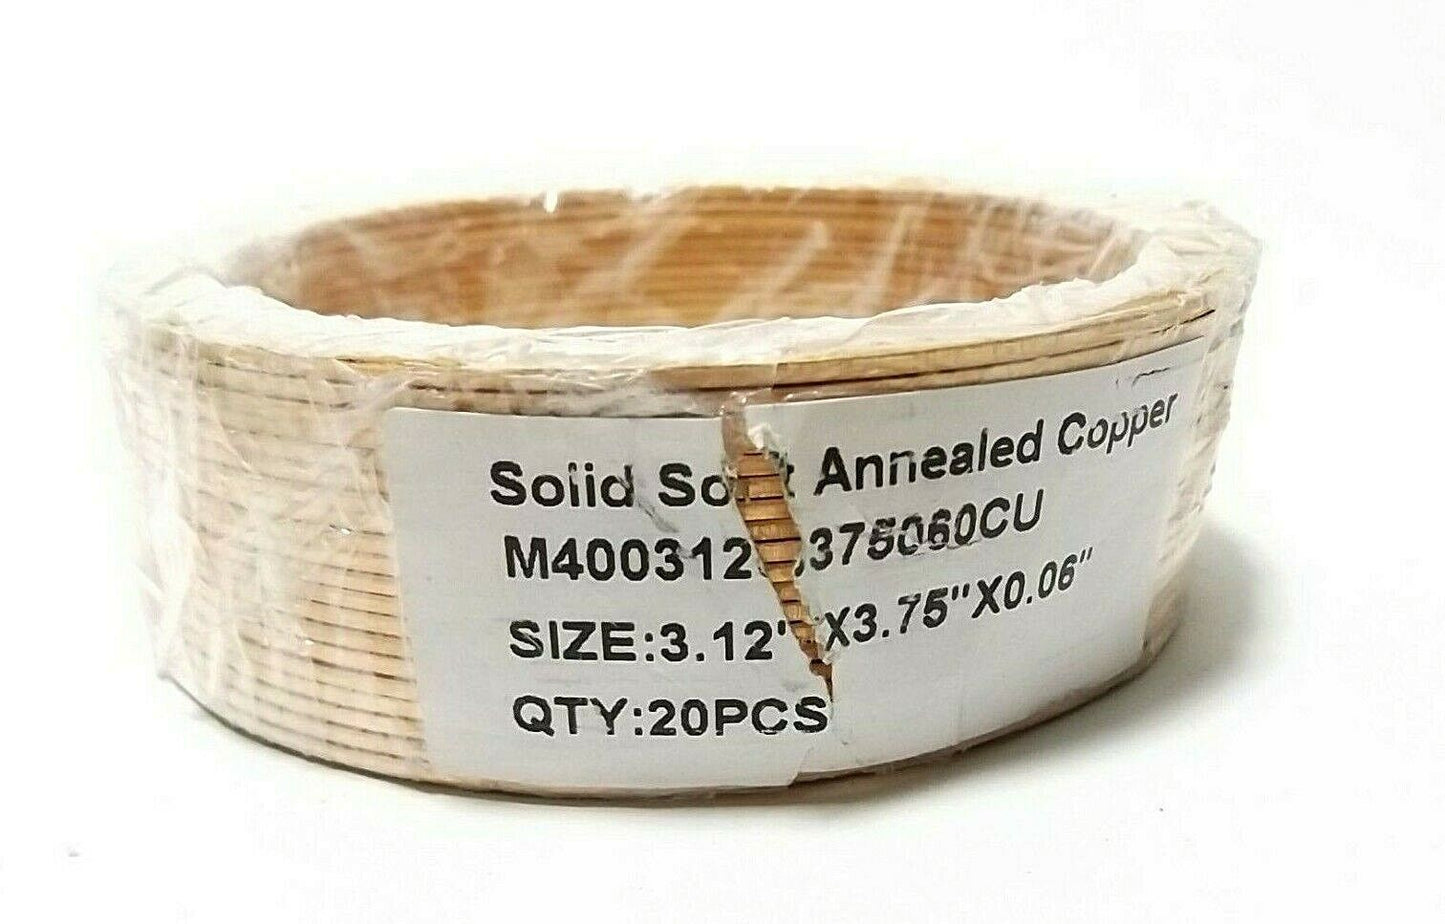 (20) UNBRANDED M4003120375060CU 3.12" X 3.75" X .06" SOLID SOFT ANNEALED COPPER